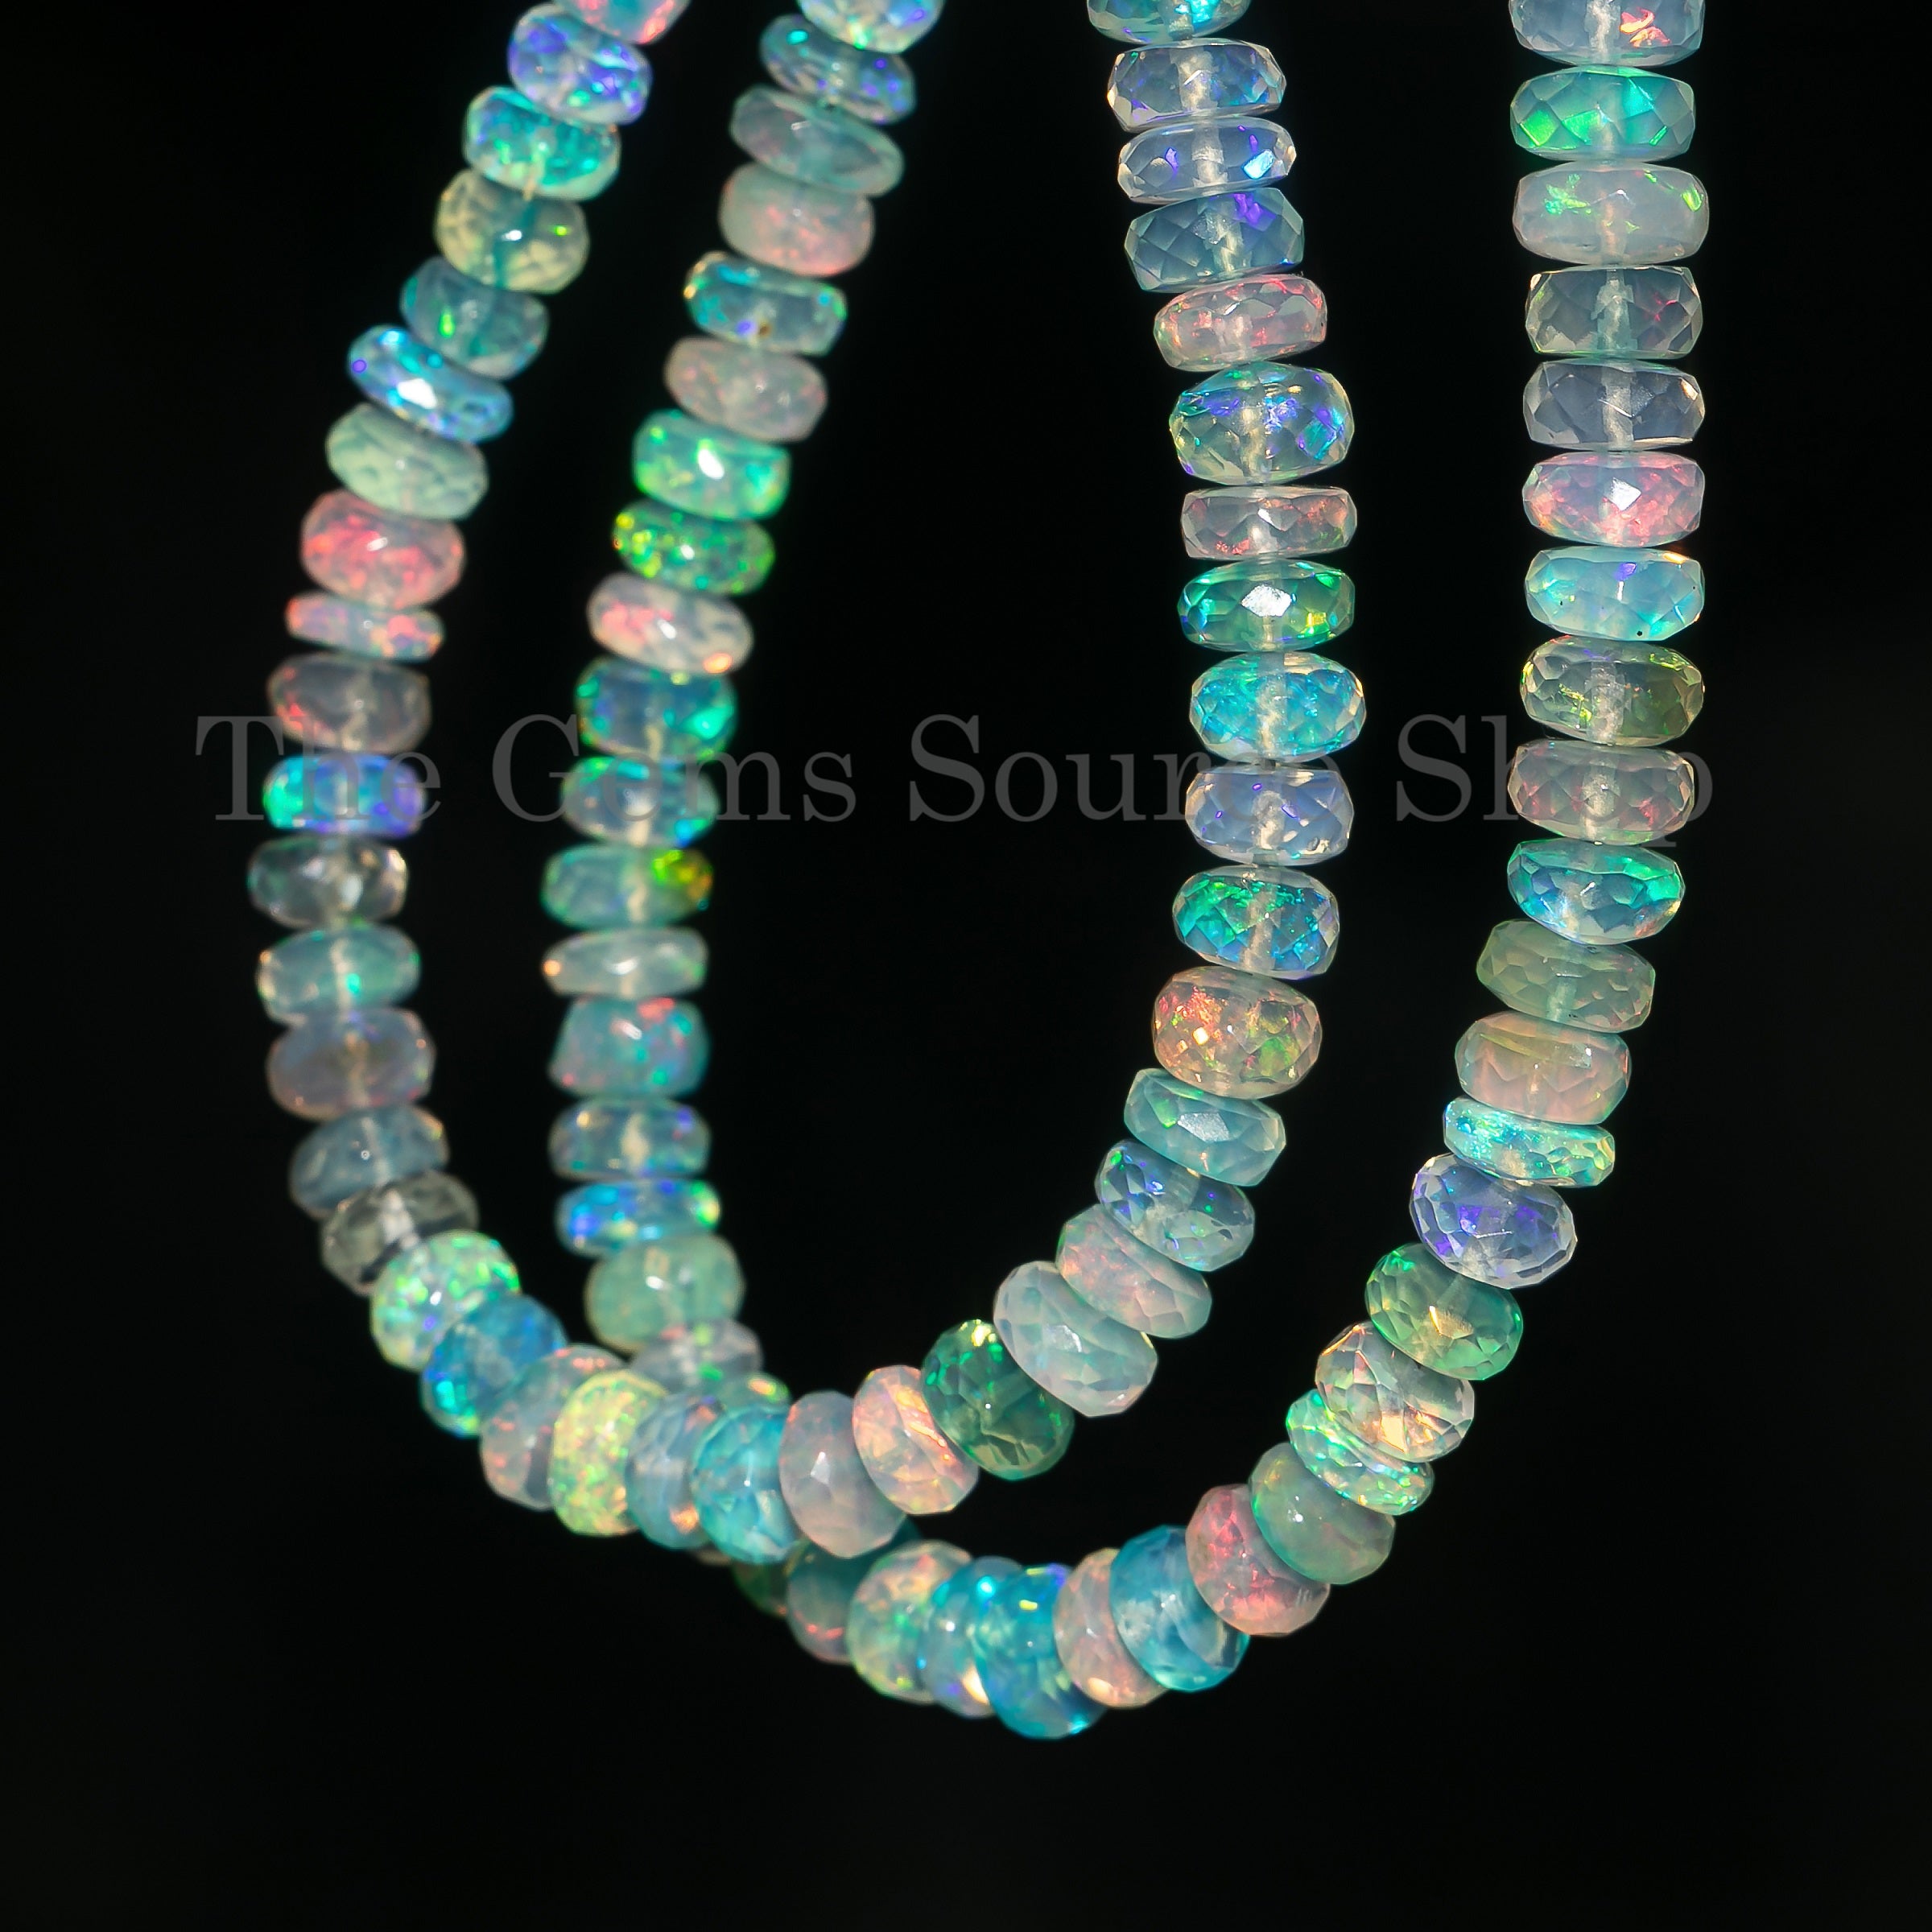 5-10 mm Light Blue Ethiopian Opal Faceted Rondelle Beads, Loose Opal Beads TGS-4544